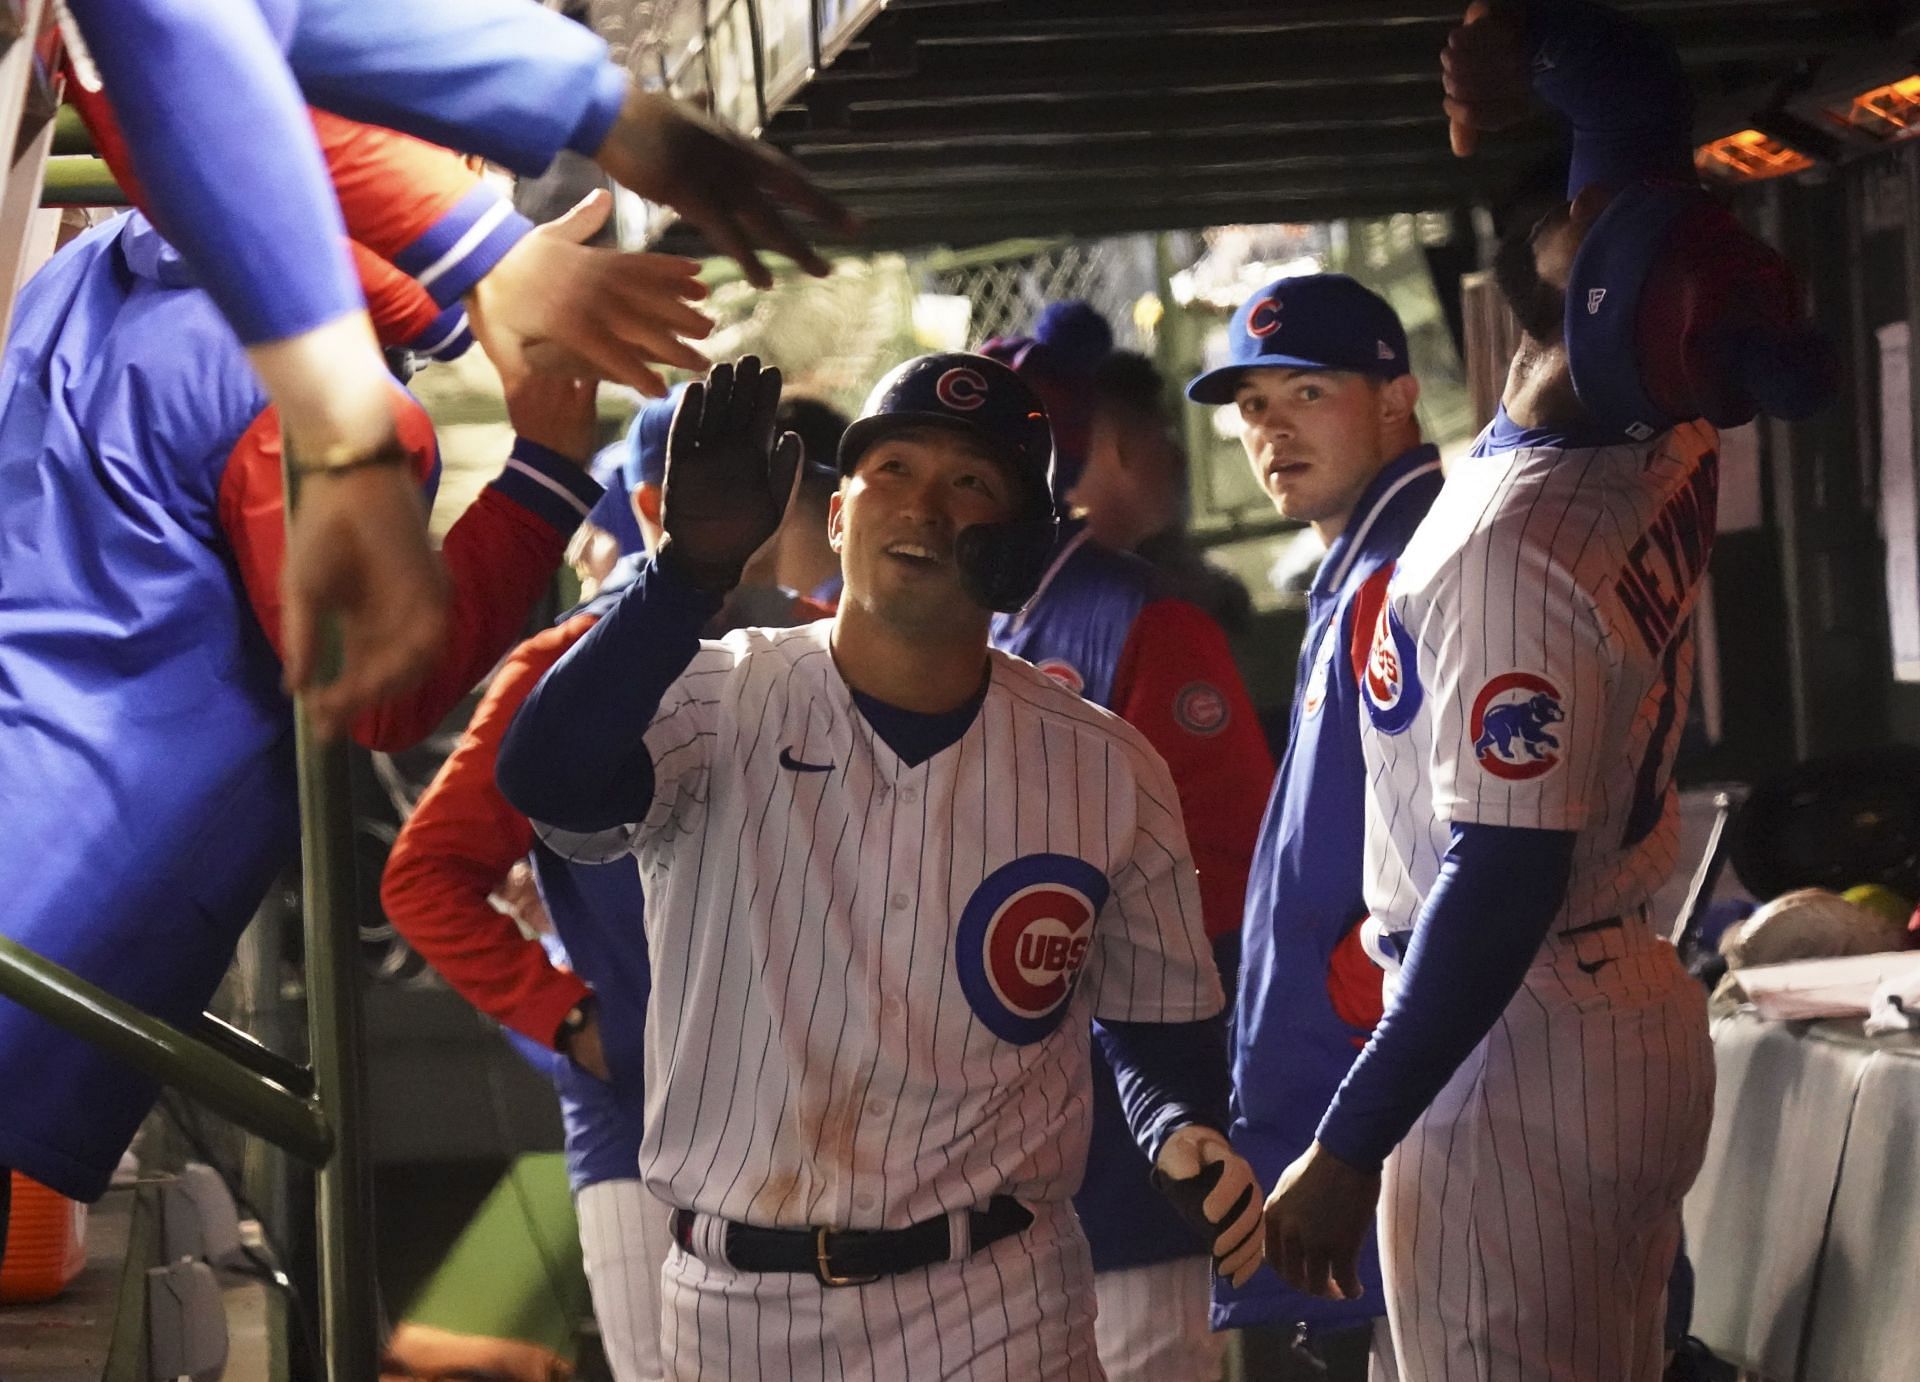 Cubs star Suzuki celebrates with teammates after a dinger against the Tampa Bay Rays